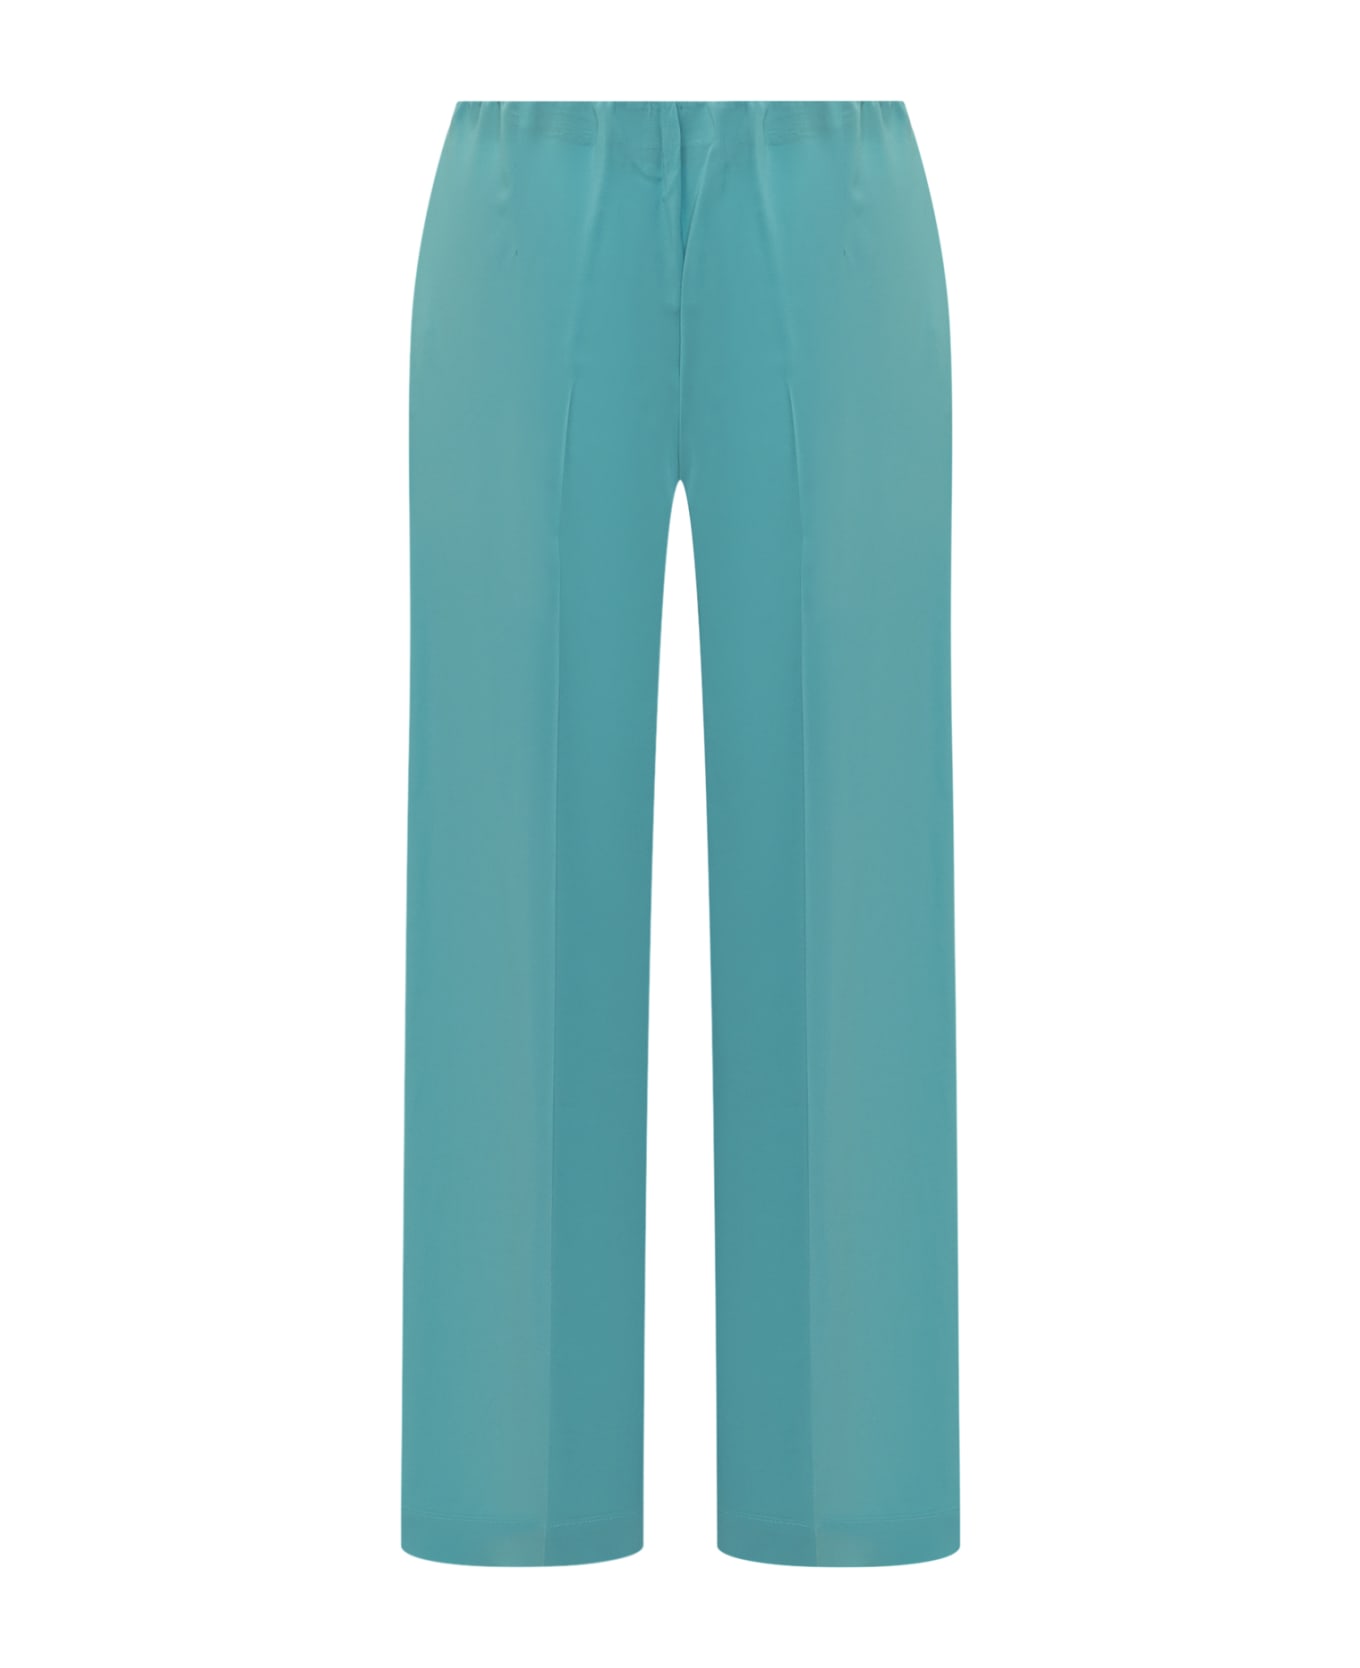 Jucca Palazzo Trousers - Turquoise